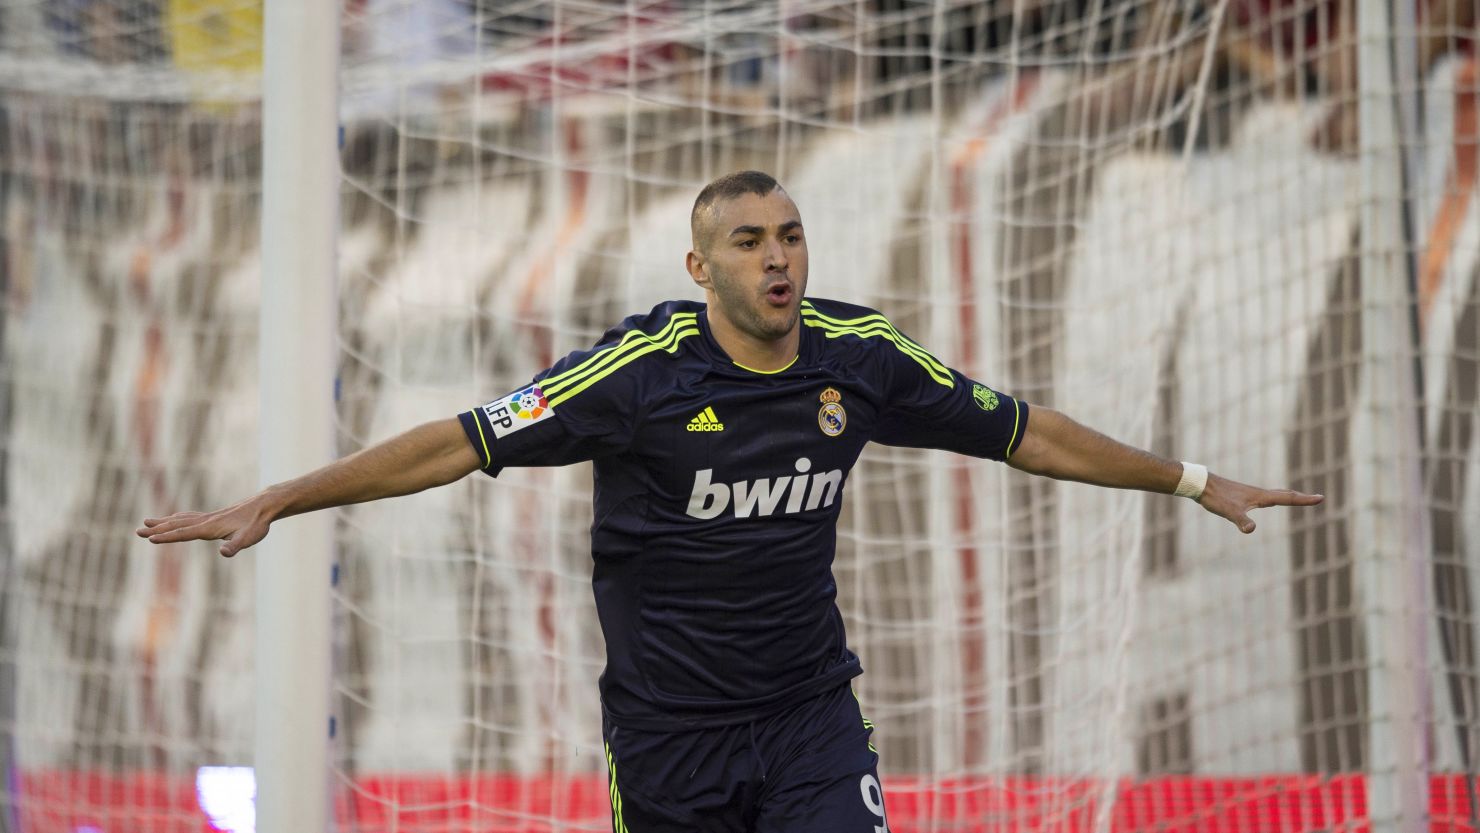 Karim Benzema put Real Madrid ahead with the opening goal during its 2-0 win at Rayo Vallecano.